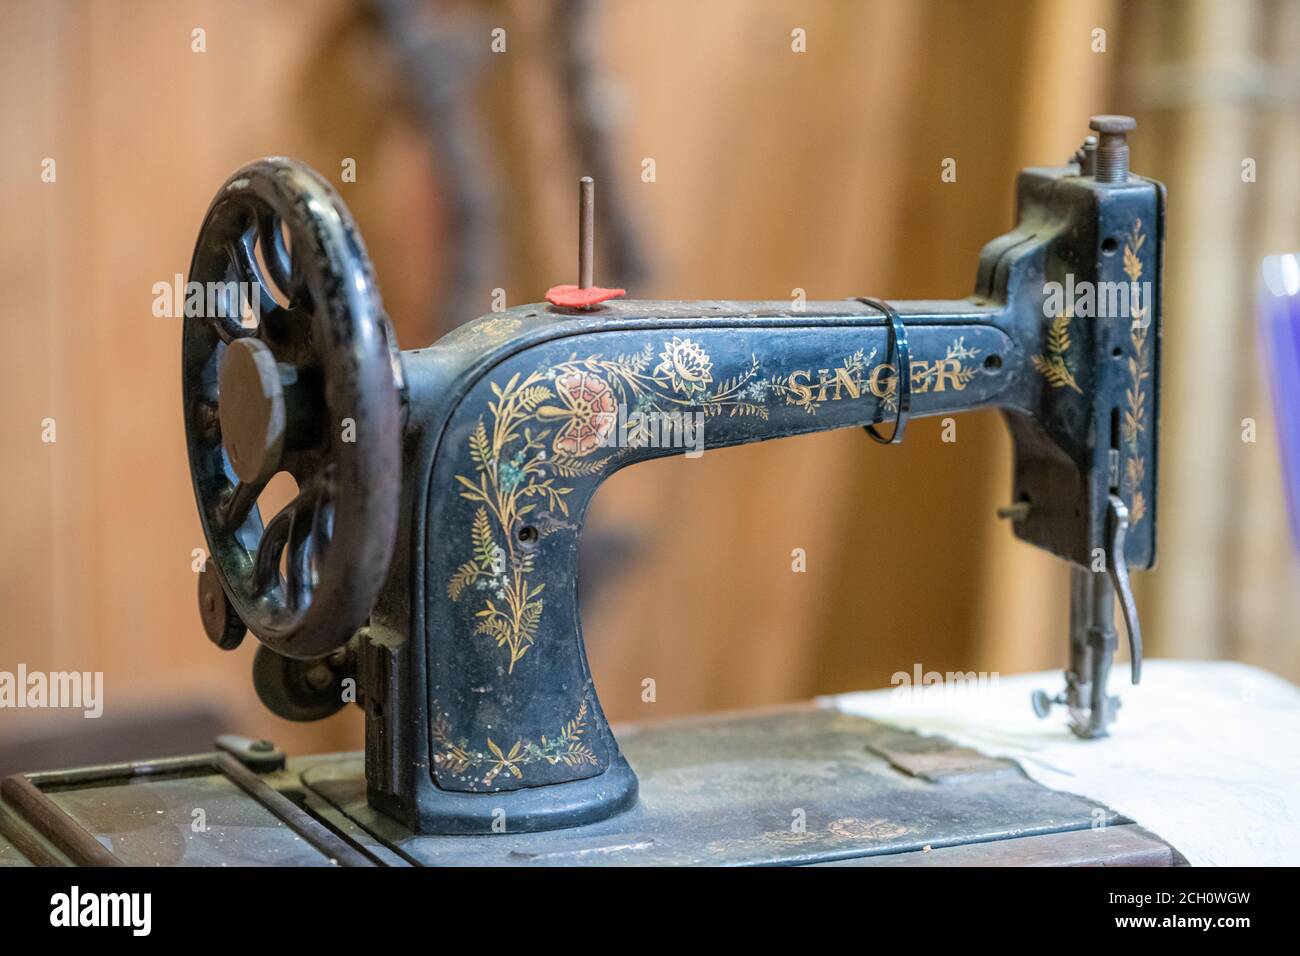 Aldershot, UK - 5/9/2020: Vintage old Singer Sewing machine on display in an exhibit in an army museum in the uK Stock Photo